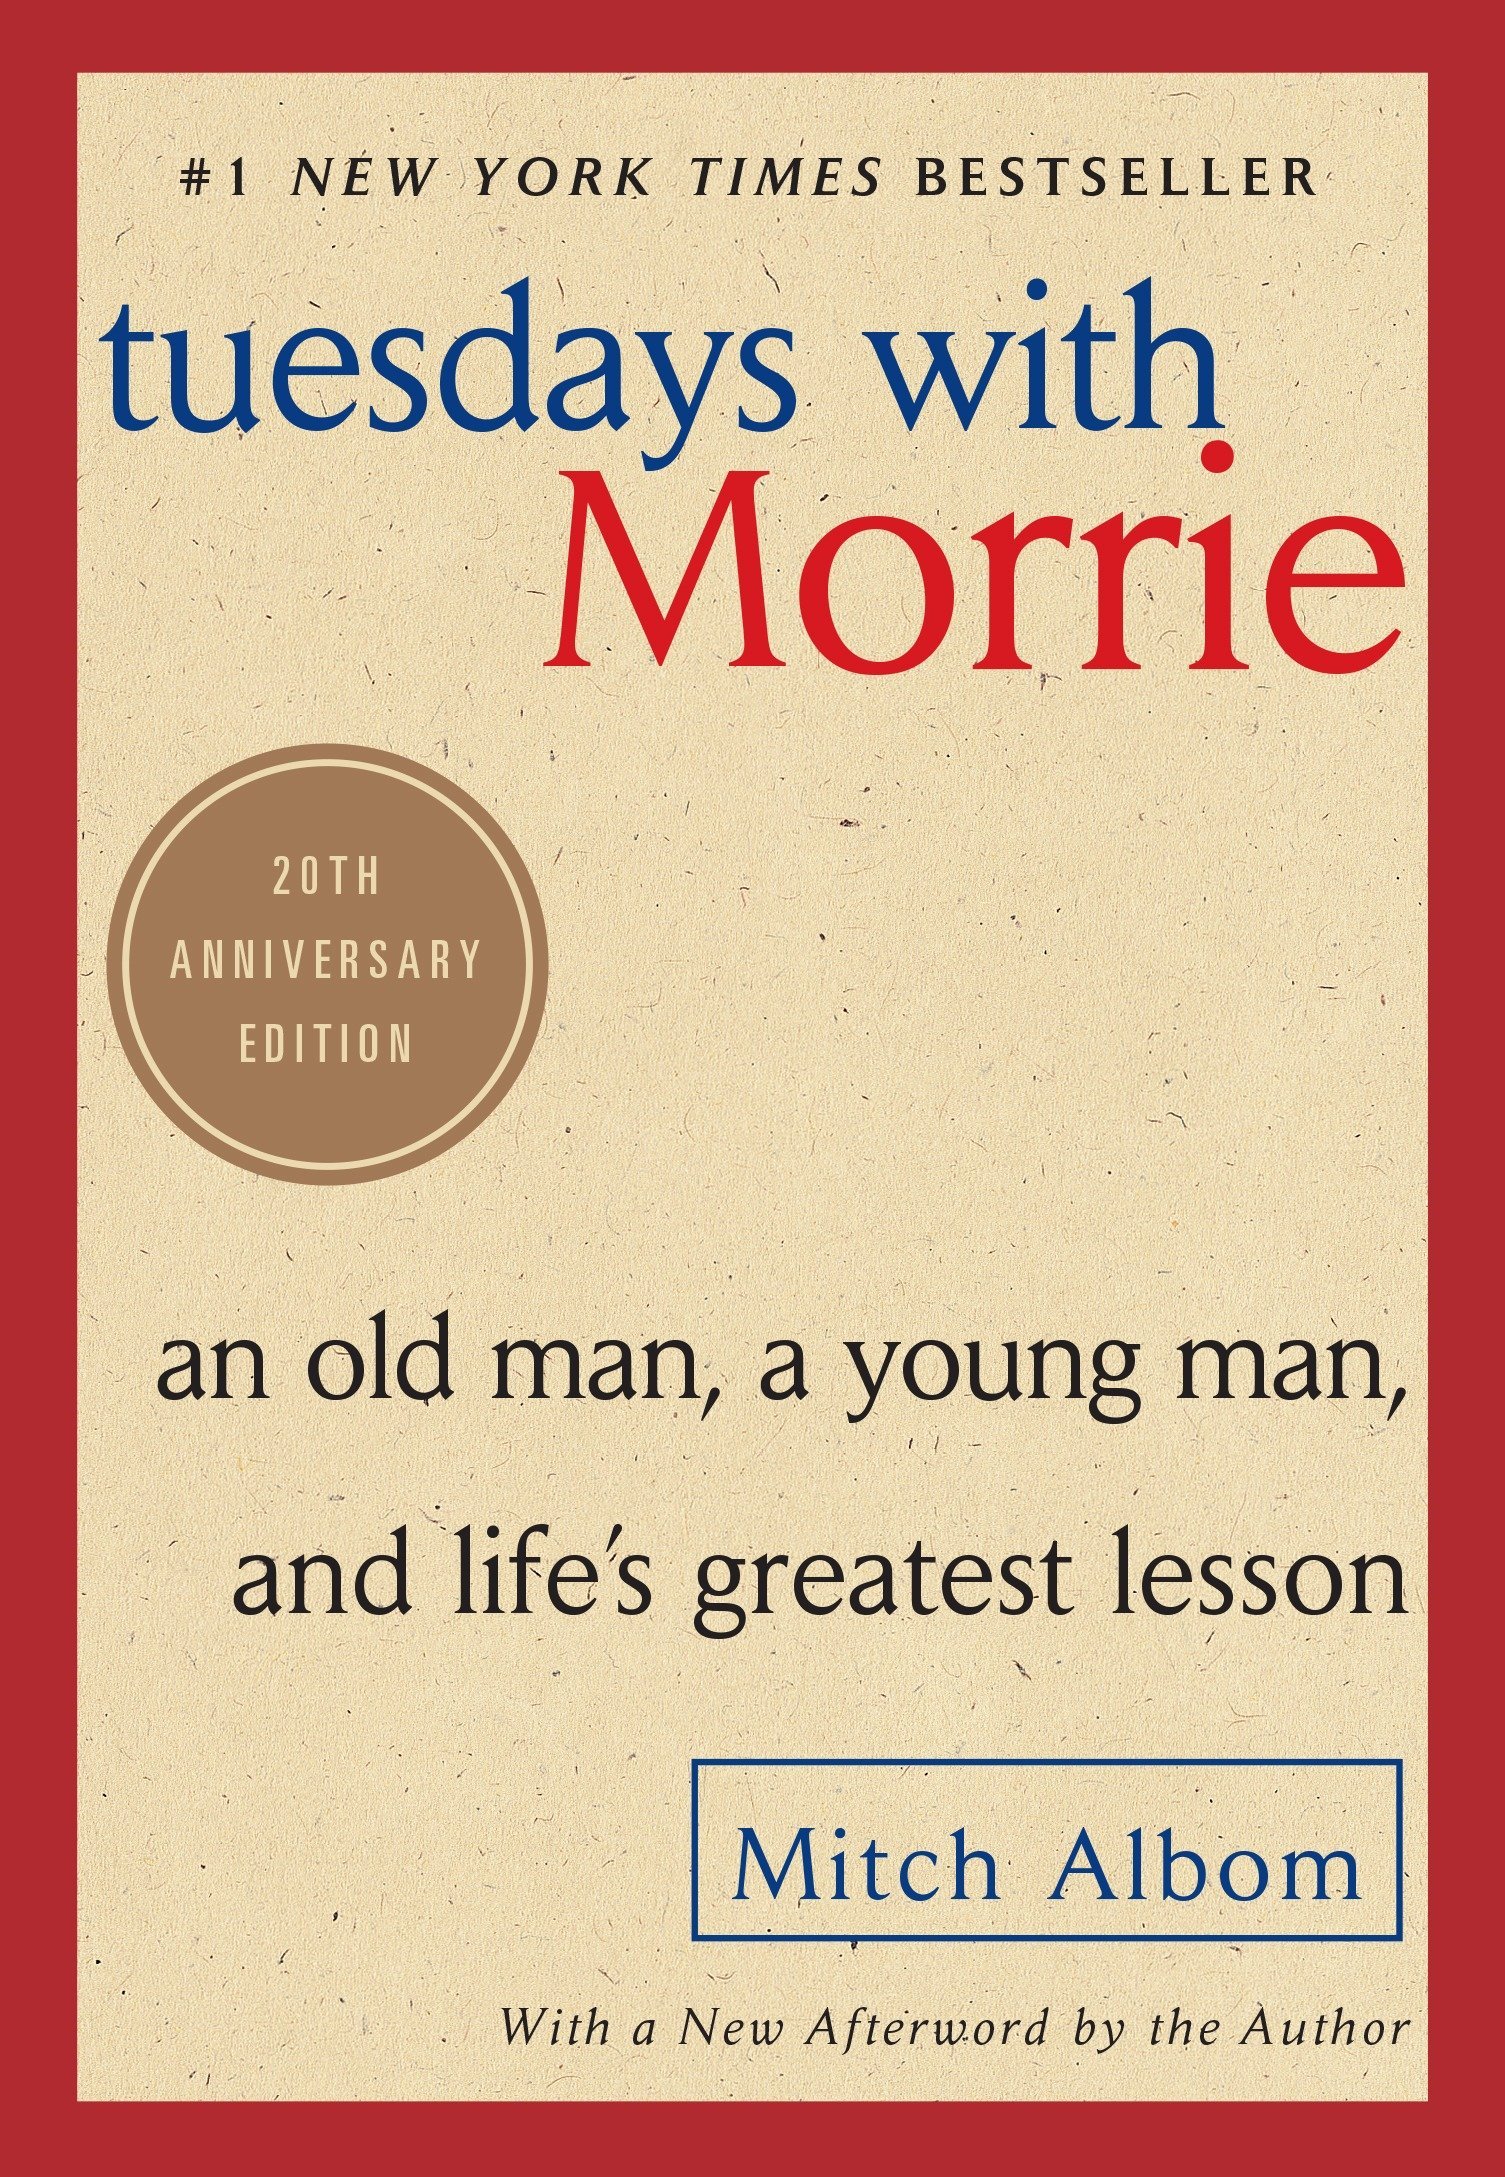 Tuesdays with Morrie : An Old Man, a Young Man, and Life's Greatest Lesson.